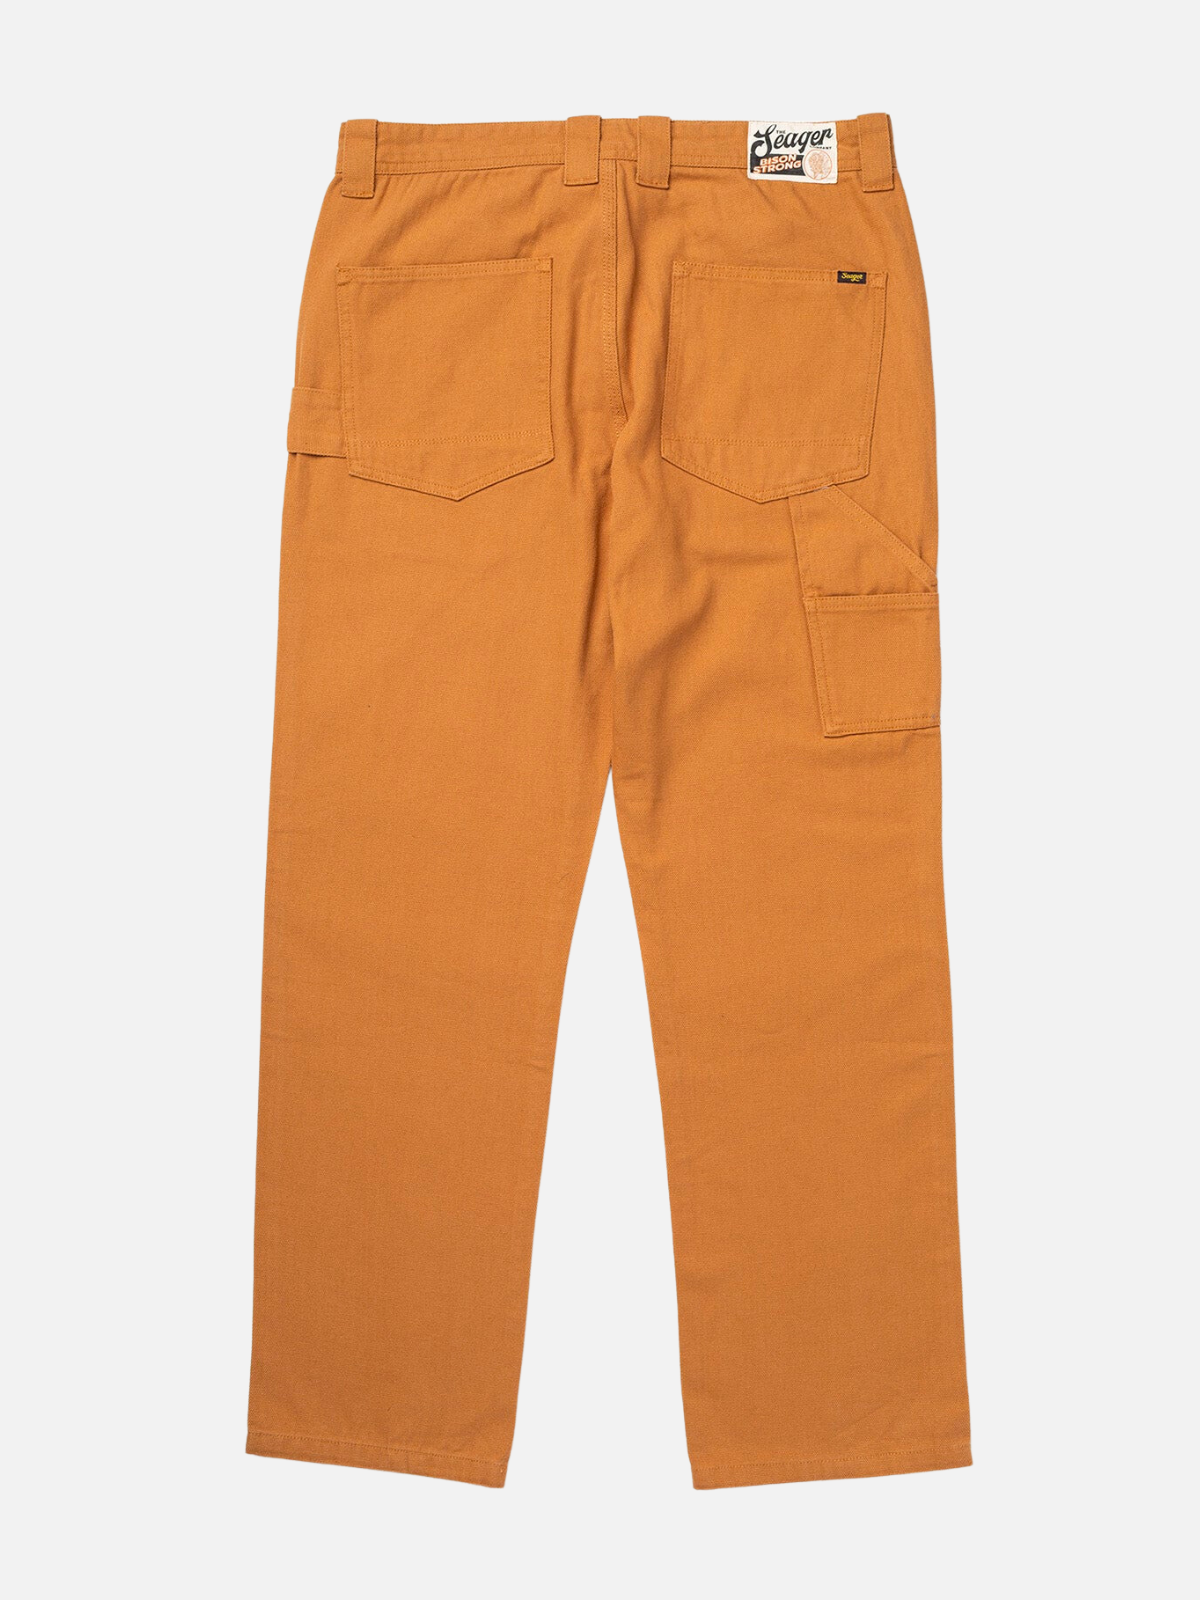 seager bison canvas pant coyote brown 100% cotton utility workwear relaxed fit pant kempt athens ga georgia men's clothing store